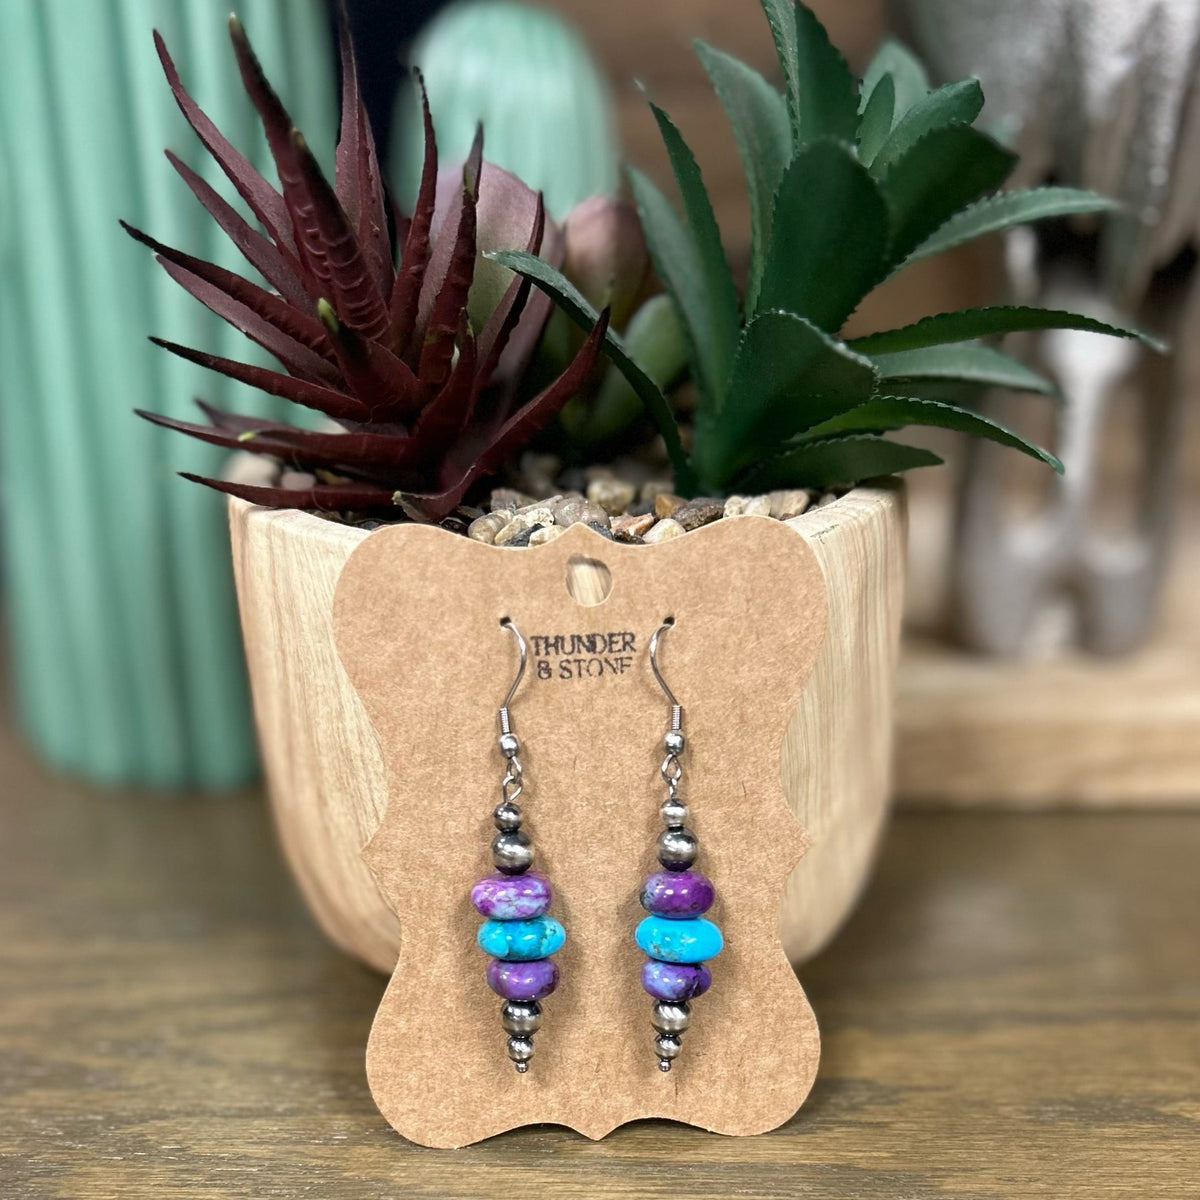 Authentic Navajo Pearl Earrings with Purple and Turquoise Stones